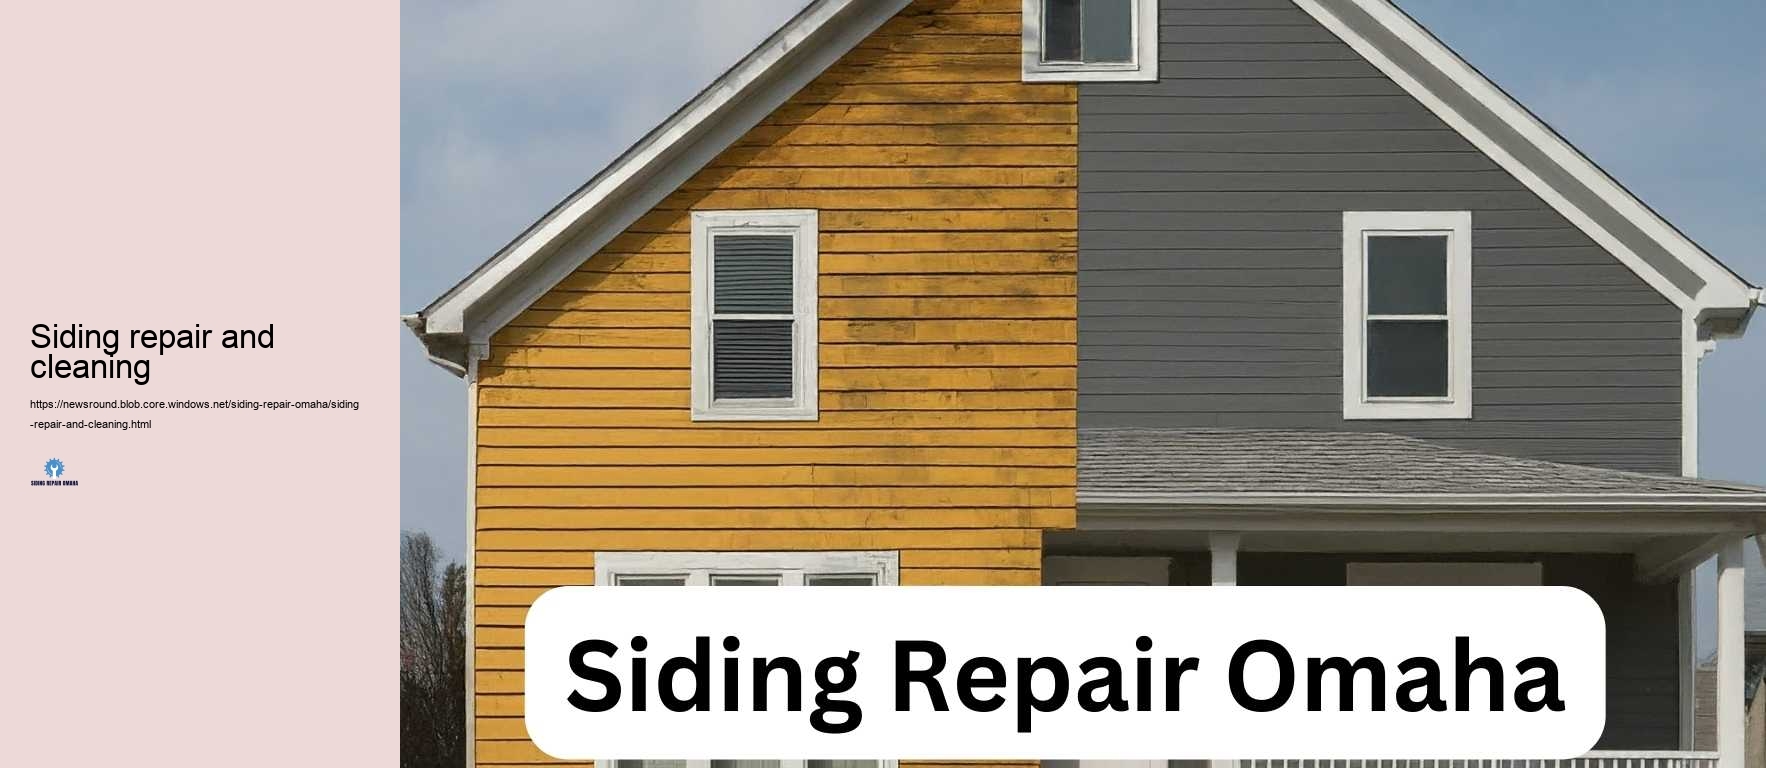 Siding repair and cleaning